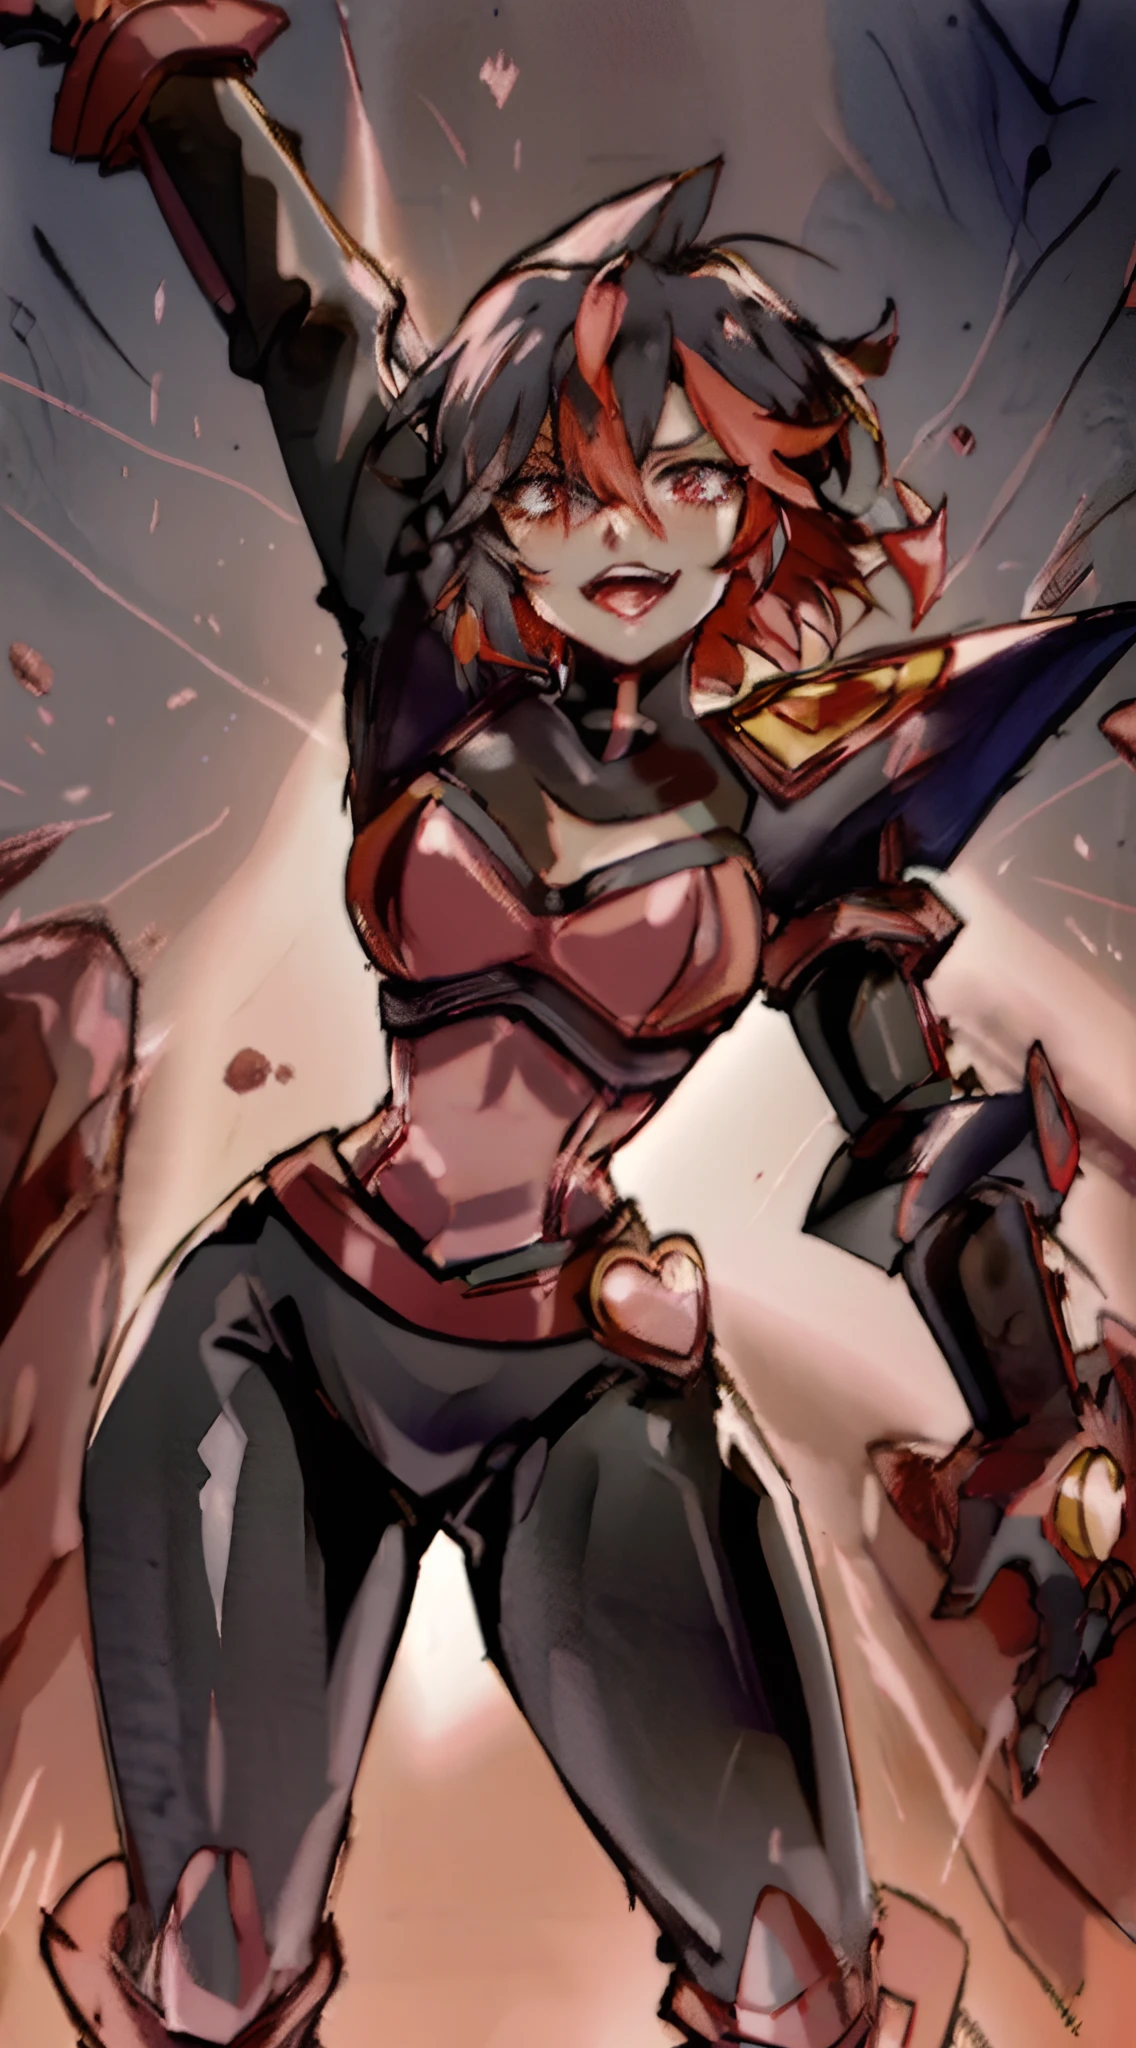 (Best quality, 4k, 8k, Ultra HD, high resolution, masterpiece:1.2), Ryuko Matoi as Mettaton, full spandex/latex attire (reds and blacks), neon lights, flawless makeup, happy singing pose, fierce expression, long hair, simple greyscale background, sleek design, captivating stage presence, captivating red lipstick, confident stance, fashion model, anime glasses, anime tinted red shades, black latex pants, black latex corset, holding a large stage microphone, performance microphone, black microphone, singing stance, extremely tight corset, red bow tie around neck, medium nougat-skin color, heart-shaped silver belt buckle, thick armored metal belt, heart on armored red chestplate, bobcut hair, dark brown hair, heavily armored black cuirass, chest encased in armor, black turtleneck armored, wide hips, black hair, thick flowing dark brown hair,black undersuit,